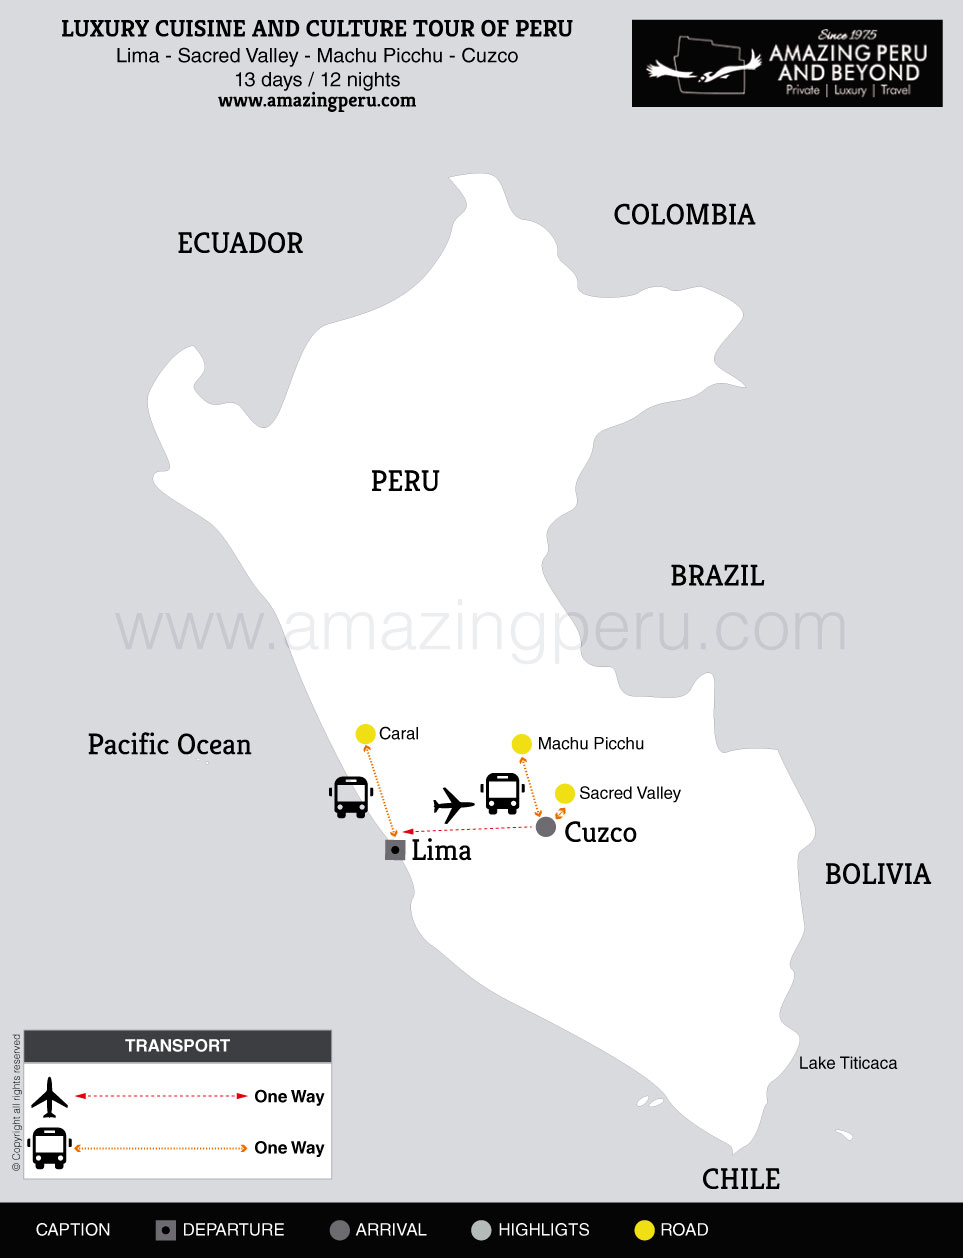 2024 Luxury Cuisine and Culture Tour of Peru - 13 days / 12 nights.